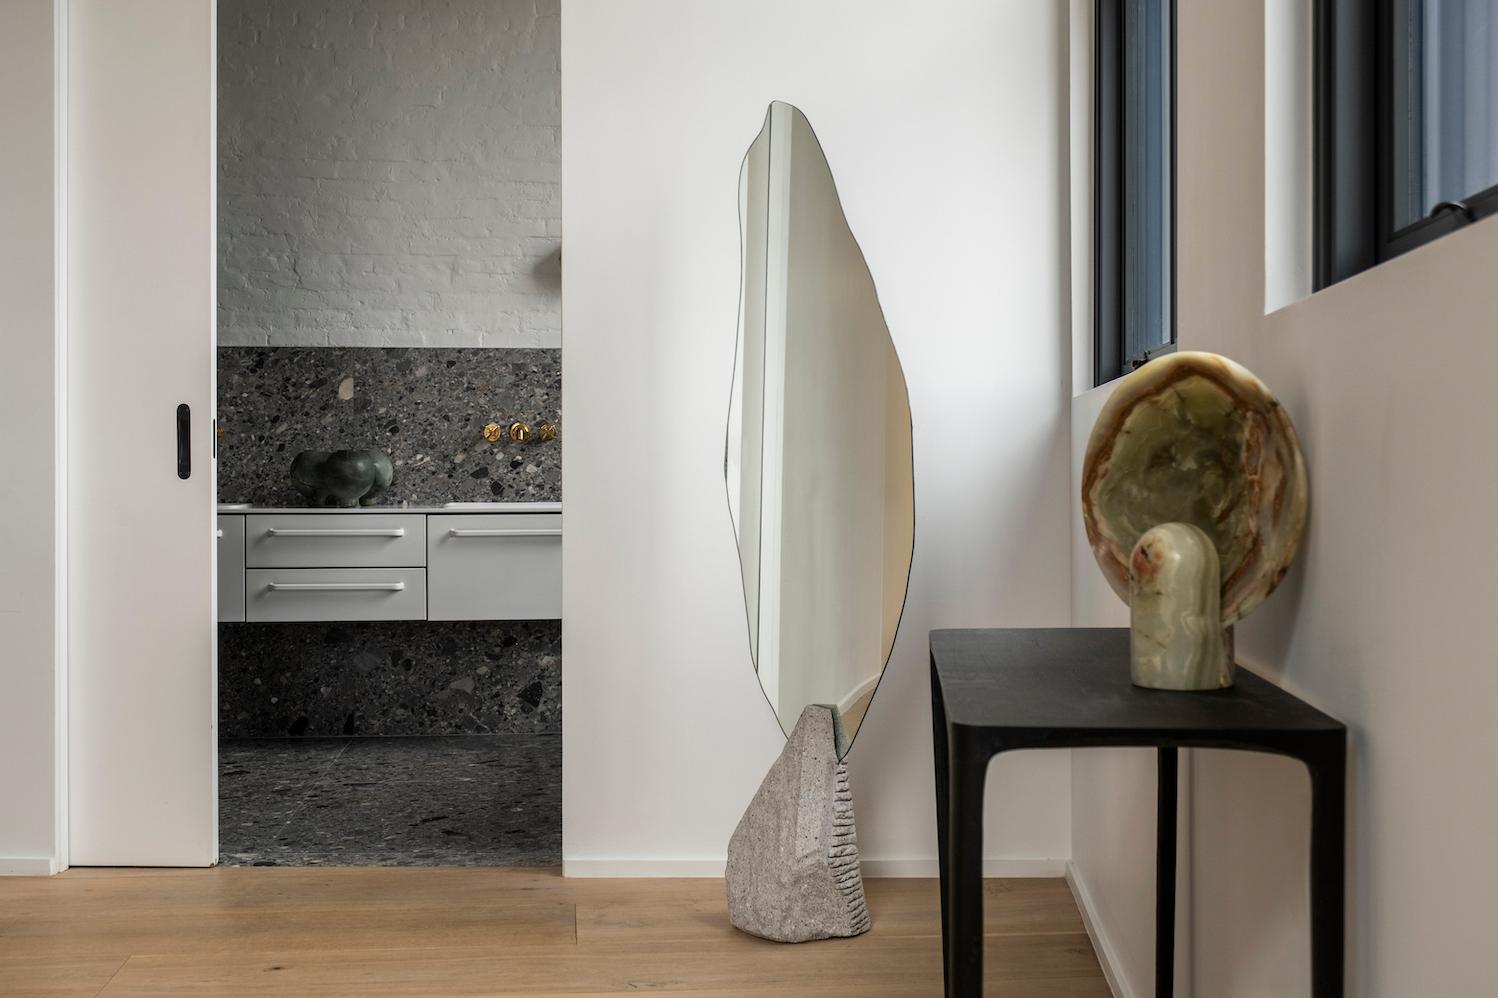 Narciso Uno Mirror by Andres Monnier Treko Concrete
Dimensions: W 60 x D 30 x H 180 cm.
Materials: Grey quarry stone, mirror. 

Narciso mirror is a piece inspired by the myth of Narciso, of greek mythology. The shape of the mirror represents the